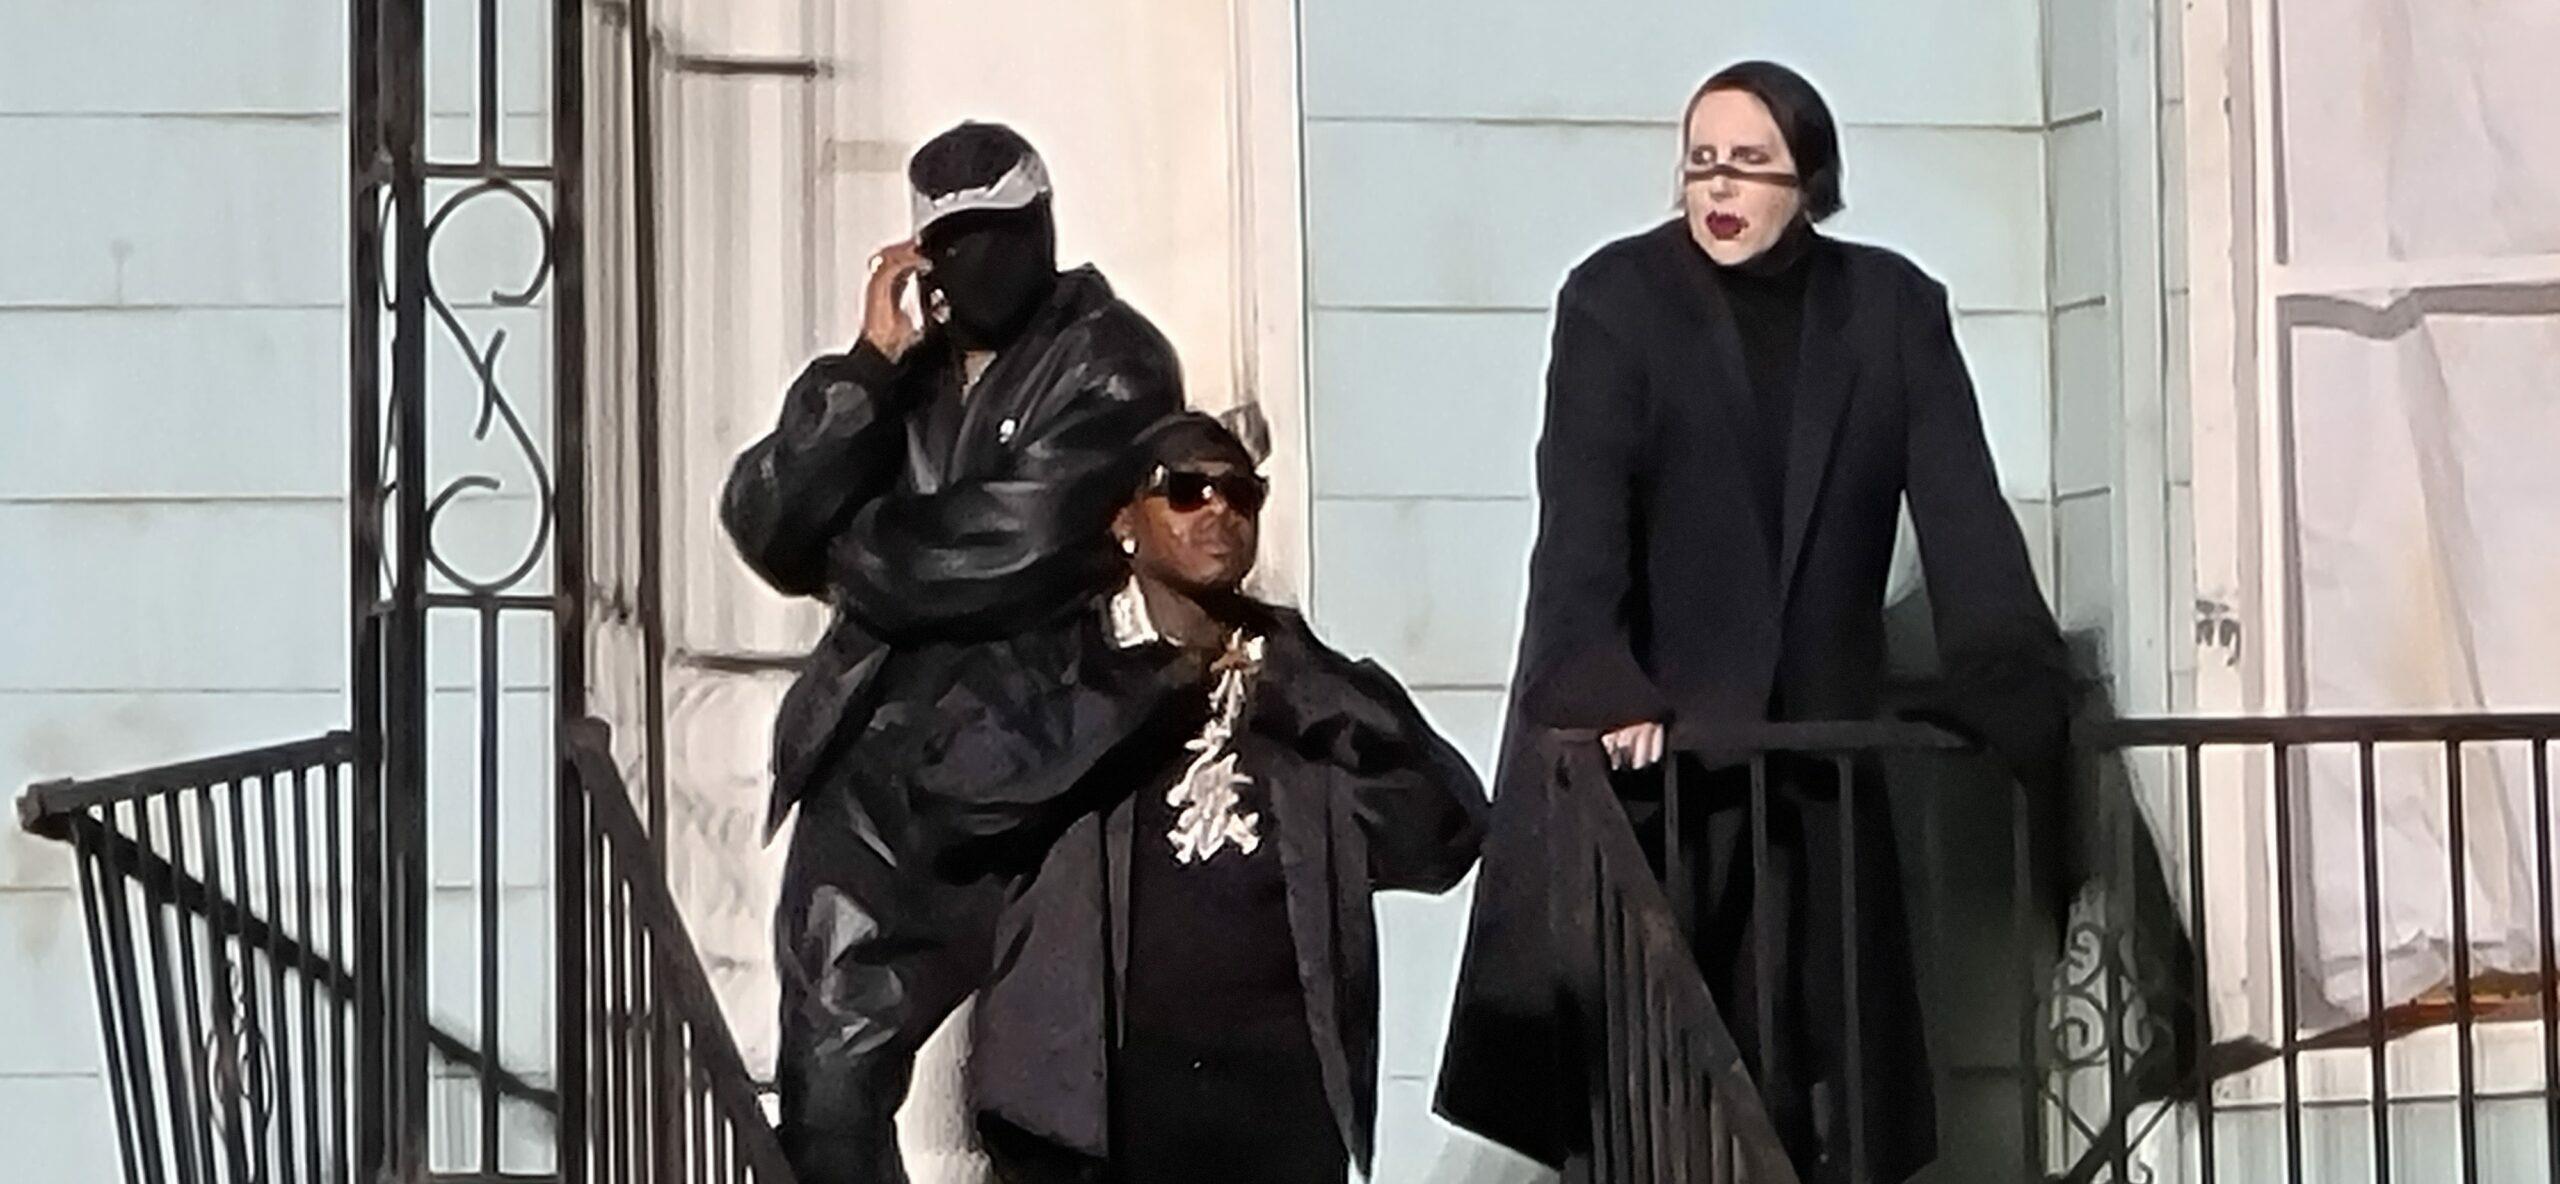 Marilyn Manson and Kanye West hang out on stage of a replica house of Kanyes late mother Donda in Chicago